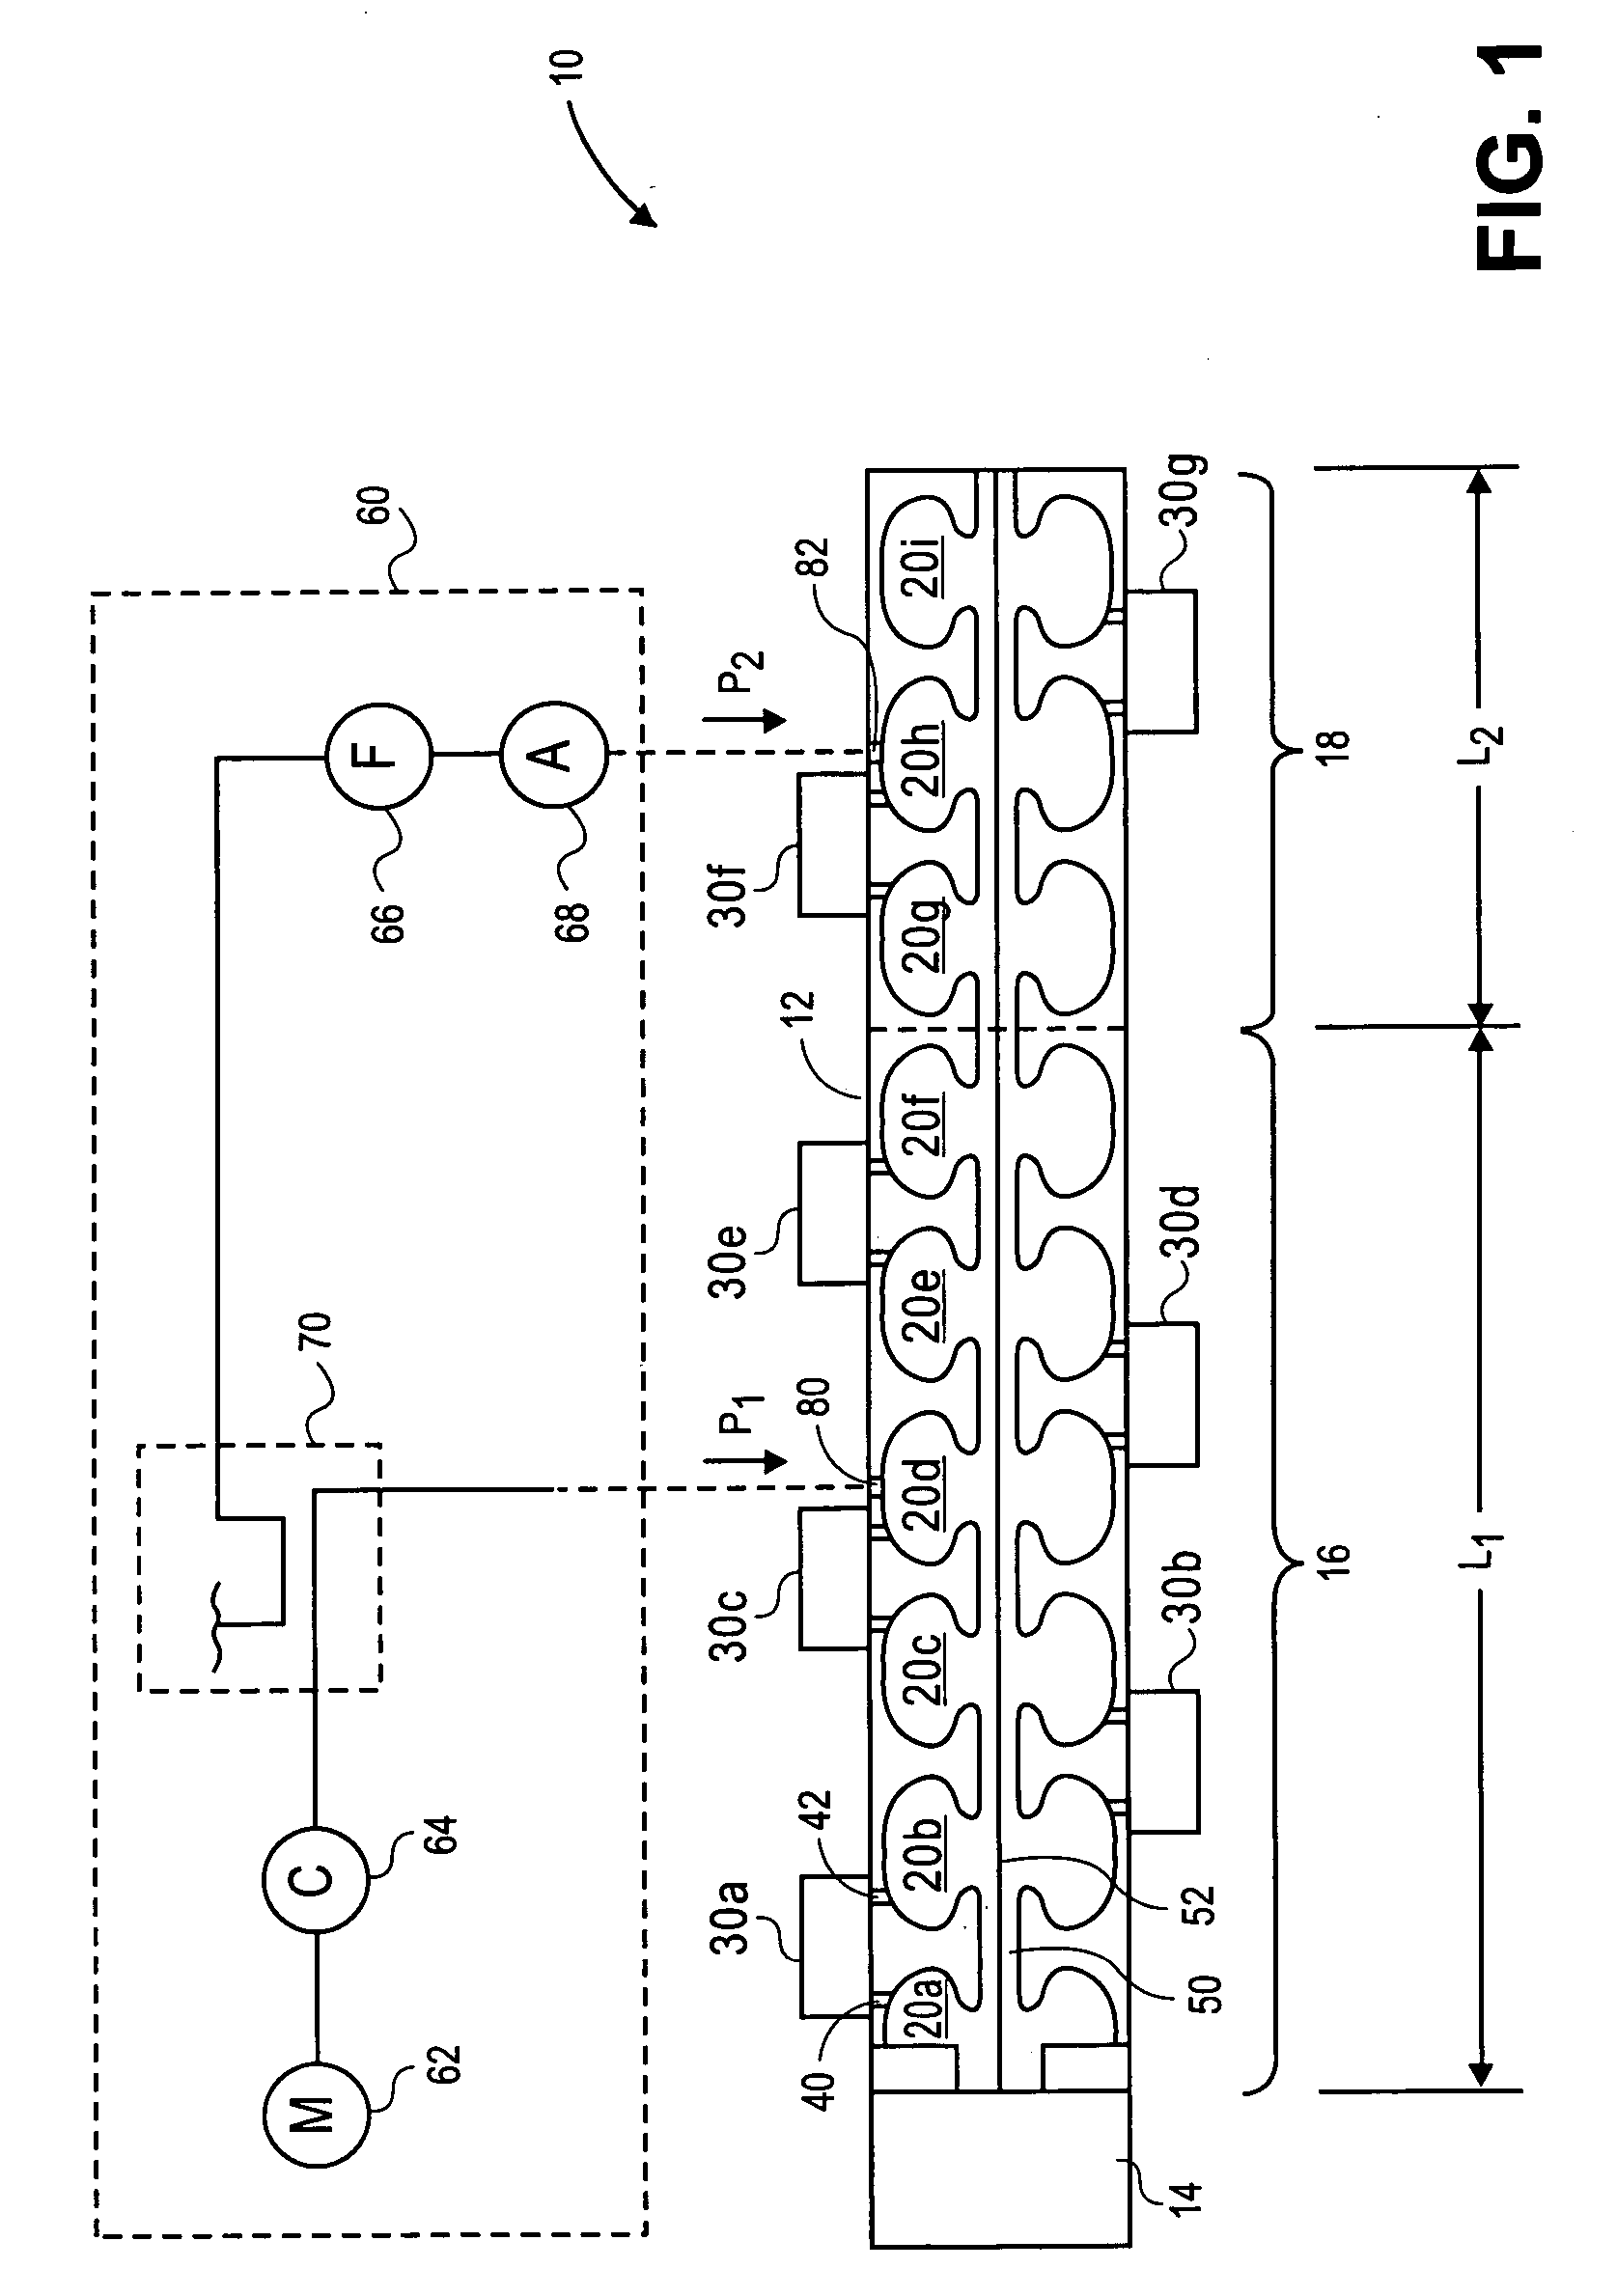 Standing wave particle beam accelerator having a plurality of power inputs